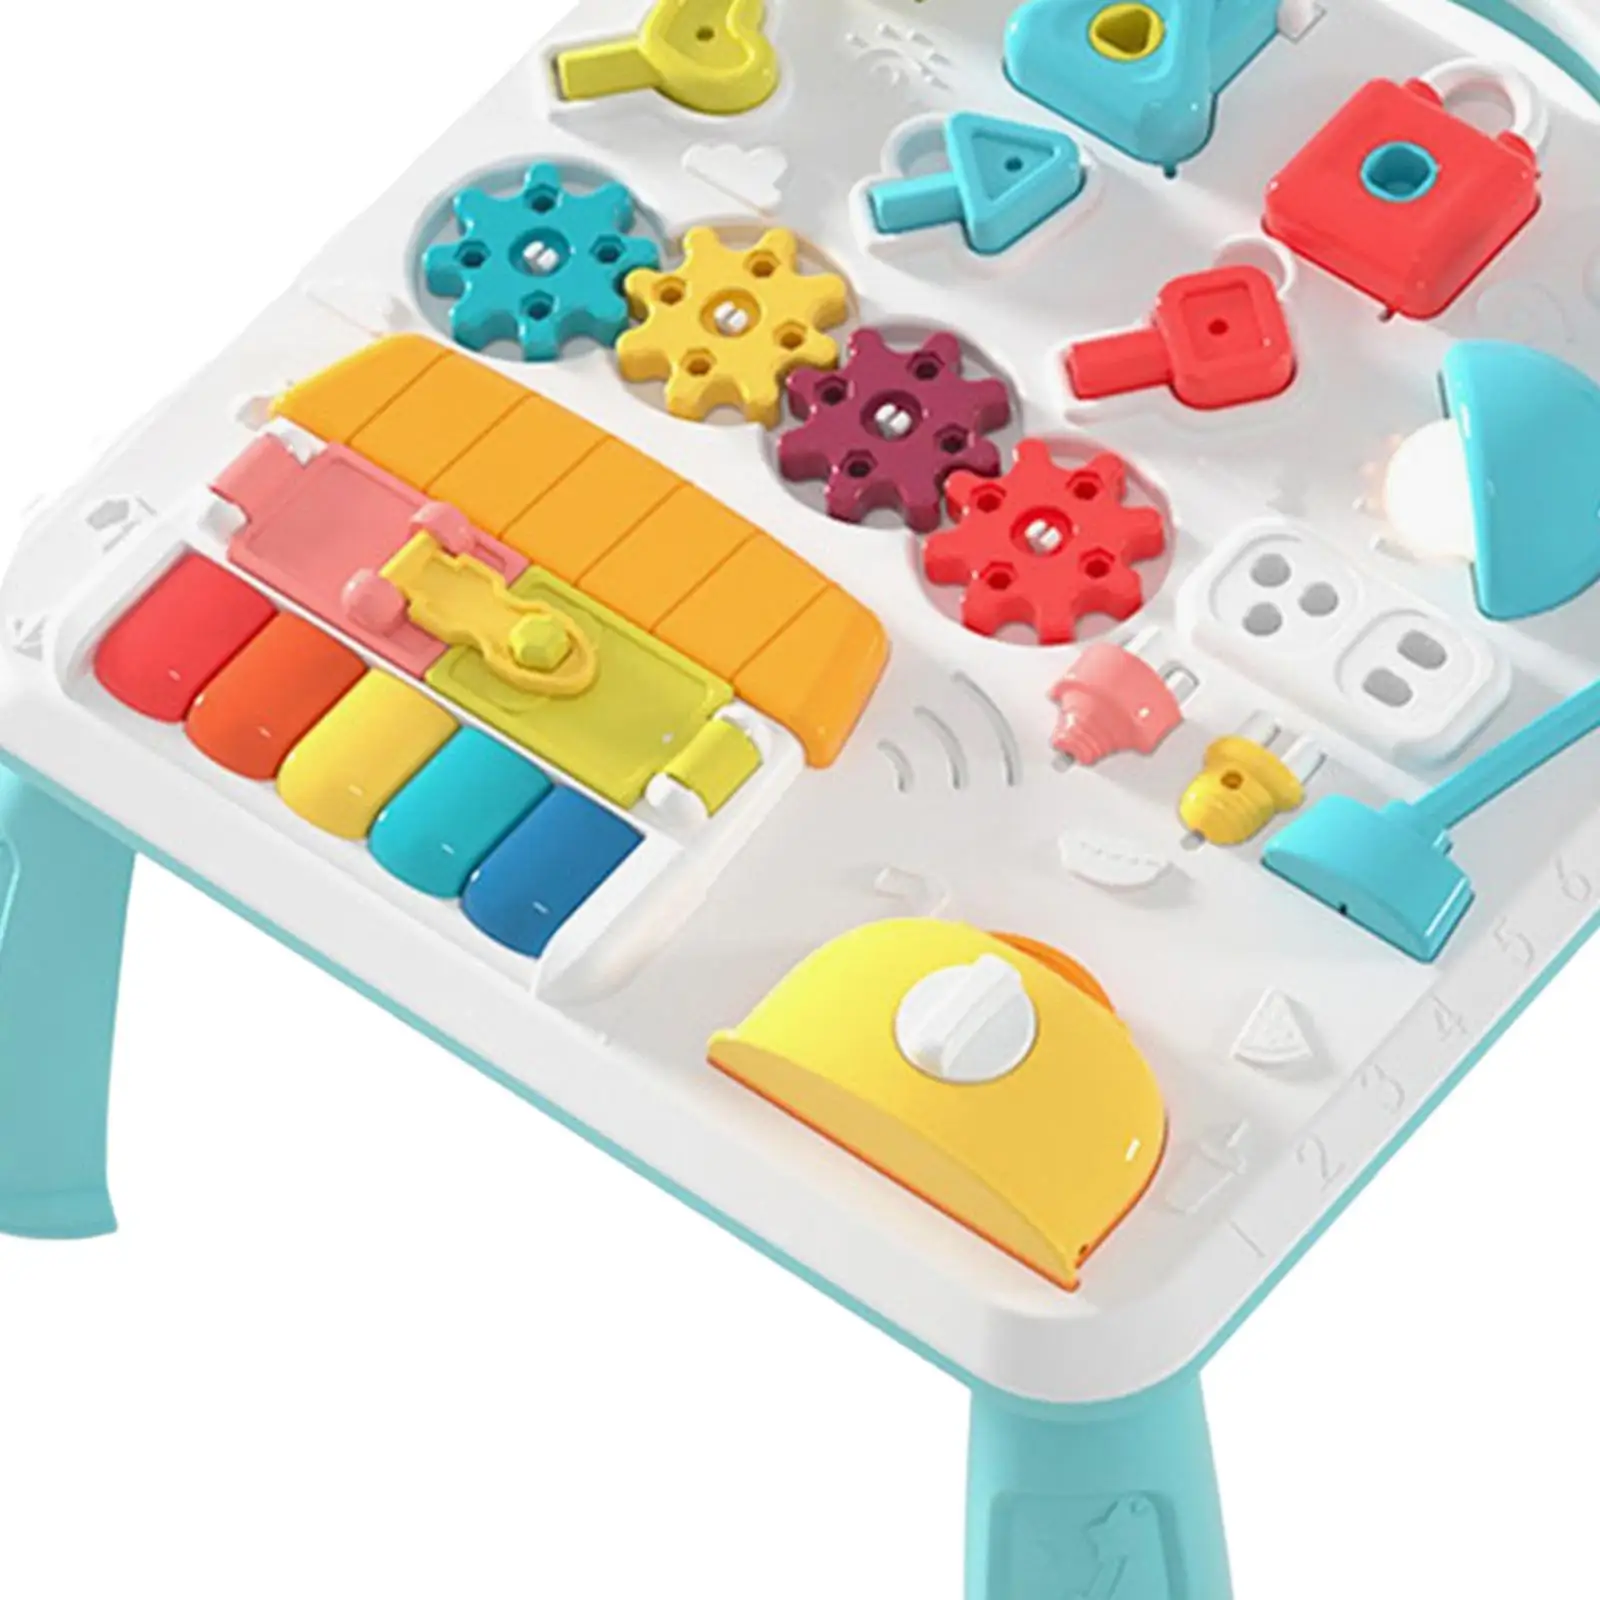 Multifunctional Learning Table Educational Play Toys with Leg Support Colorful Detachable Busy Table for Gift Girls Child Boys